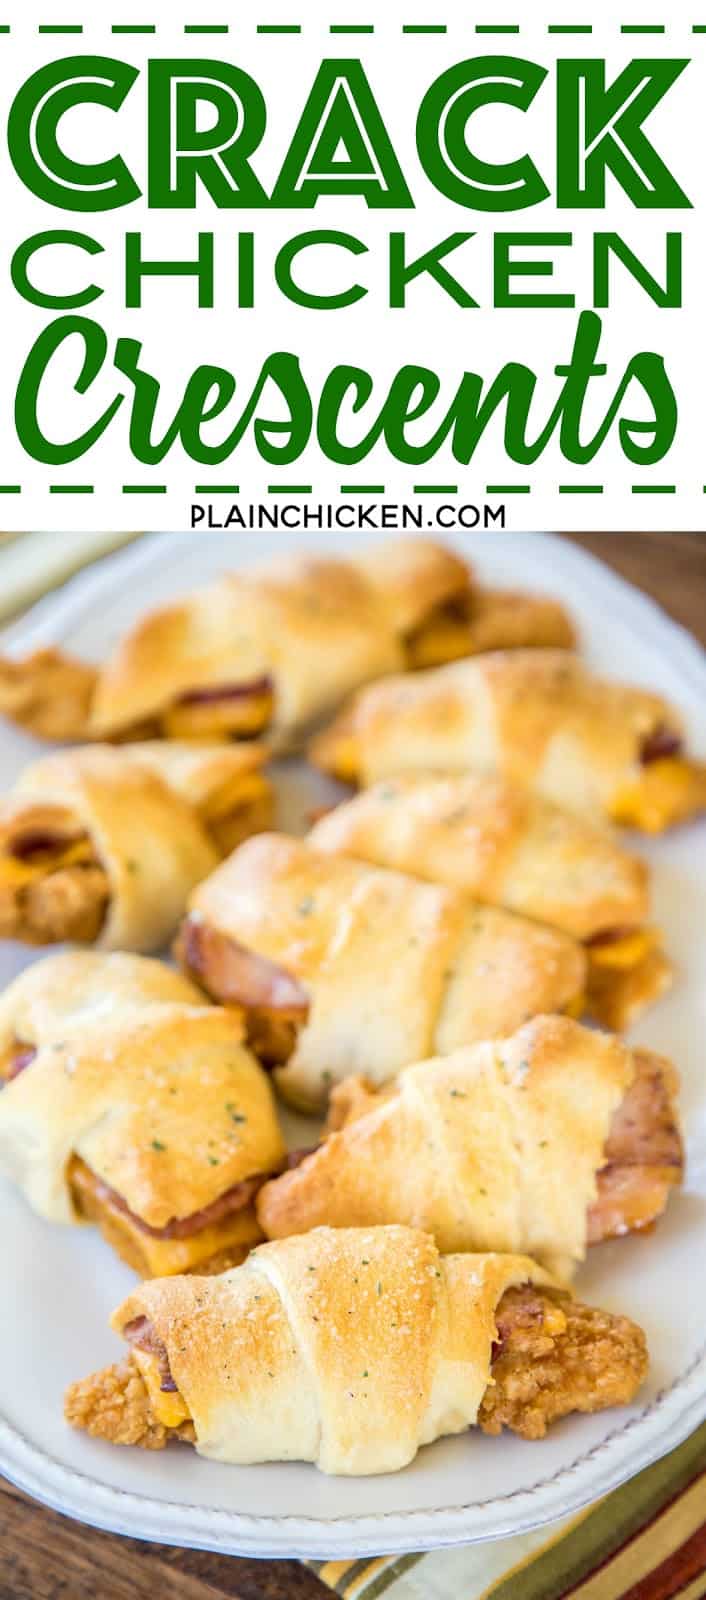 Crack Chicken Crescents - frozen chicken tenders, cheddar cheese, bacon and ranch dressing wrapped in refrigerated crescent rolls and baked. CRAZY good!!! Everyone cleaned their plate and went back for seconds! A HUGE hit with the entire family! Great for a quick lunch, dinner or tailgating! No prep work and ready to eat in under 30 minutes! YUM! #quick #easy #weeknightmeal